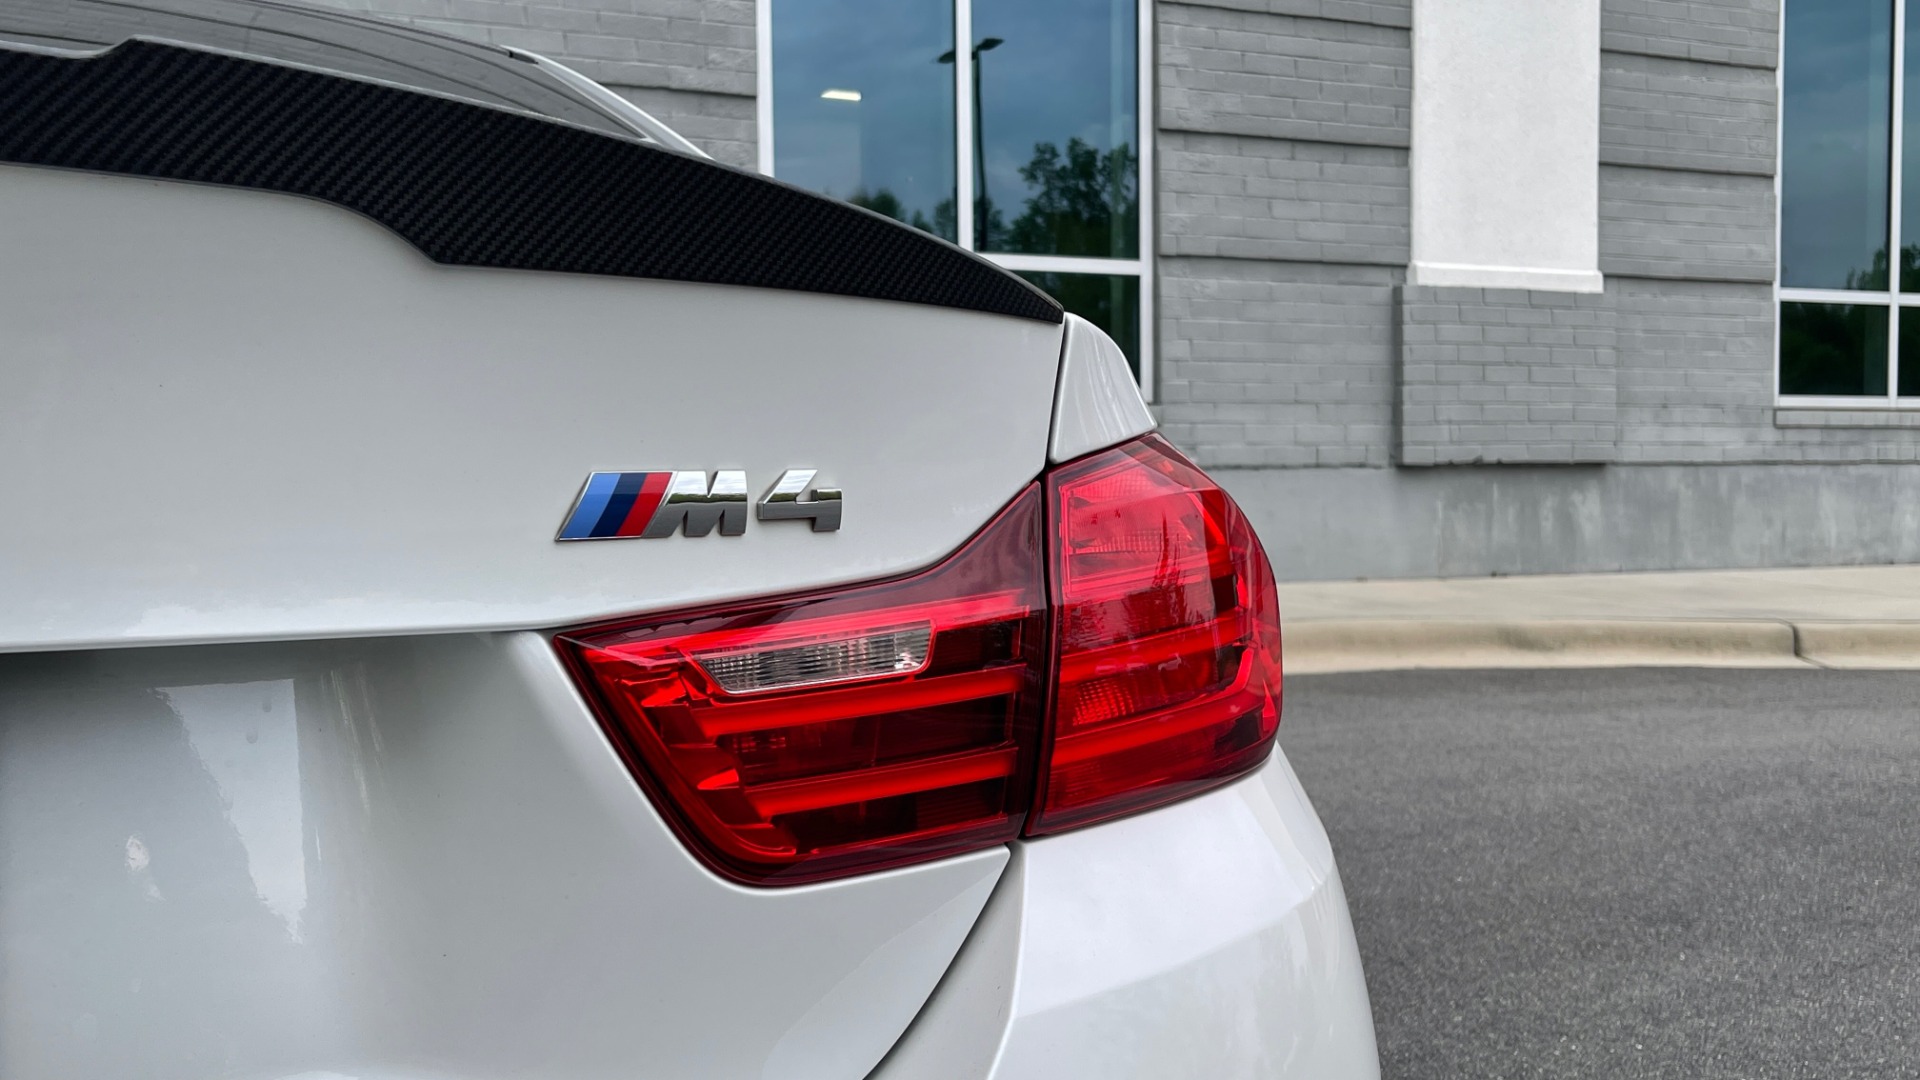 Used 2015 BMW M4 COUPE / 3.0L TURBO 425HP / 7-SPD AUTO / NAV / 19IN WHLS for sale Sold at Formula Imports in Charlotte NC 28227 28